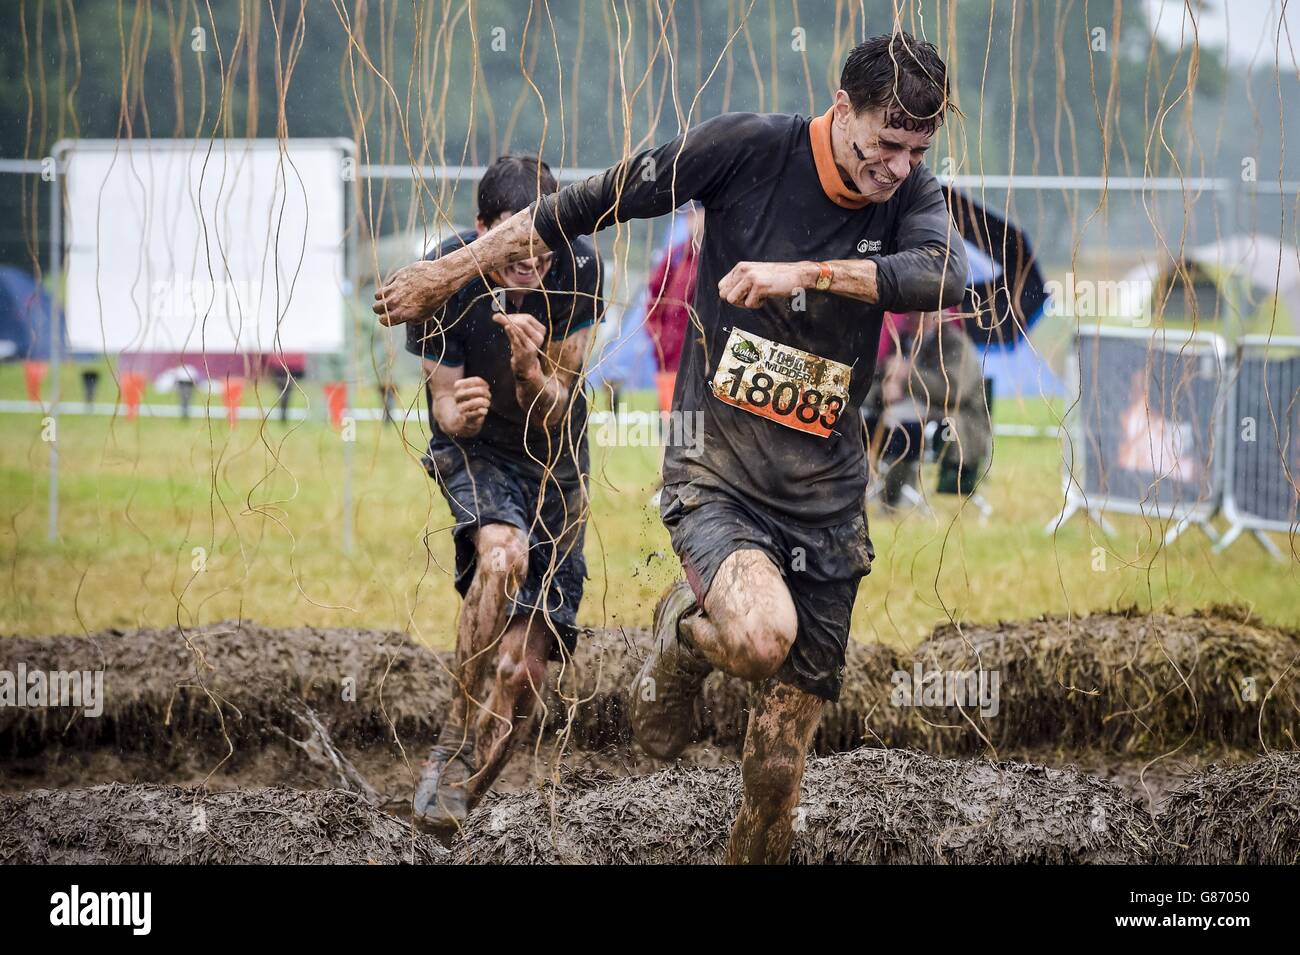 Participants wince as they run through an electric shock obstacle, as each wire gives a blast of electricity, during a Tough Mudder 12 mile event in Cirencester, Wiltshire. Stock Photo